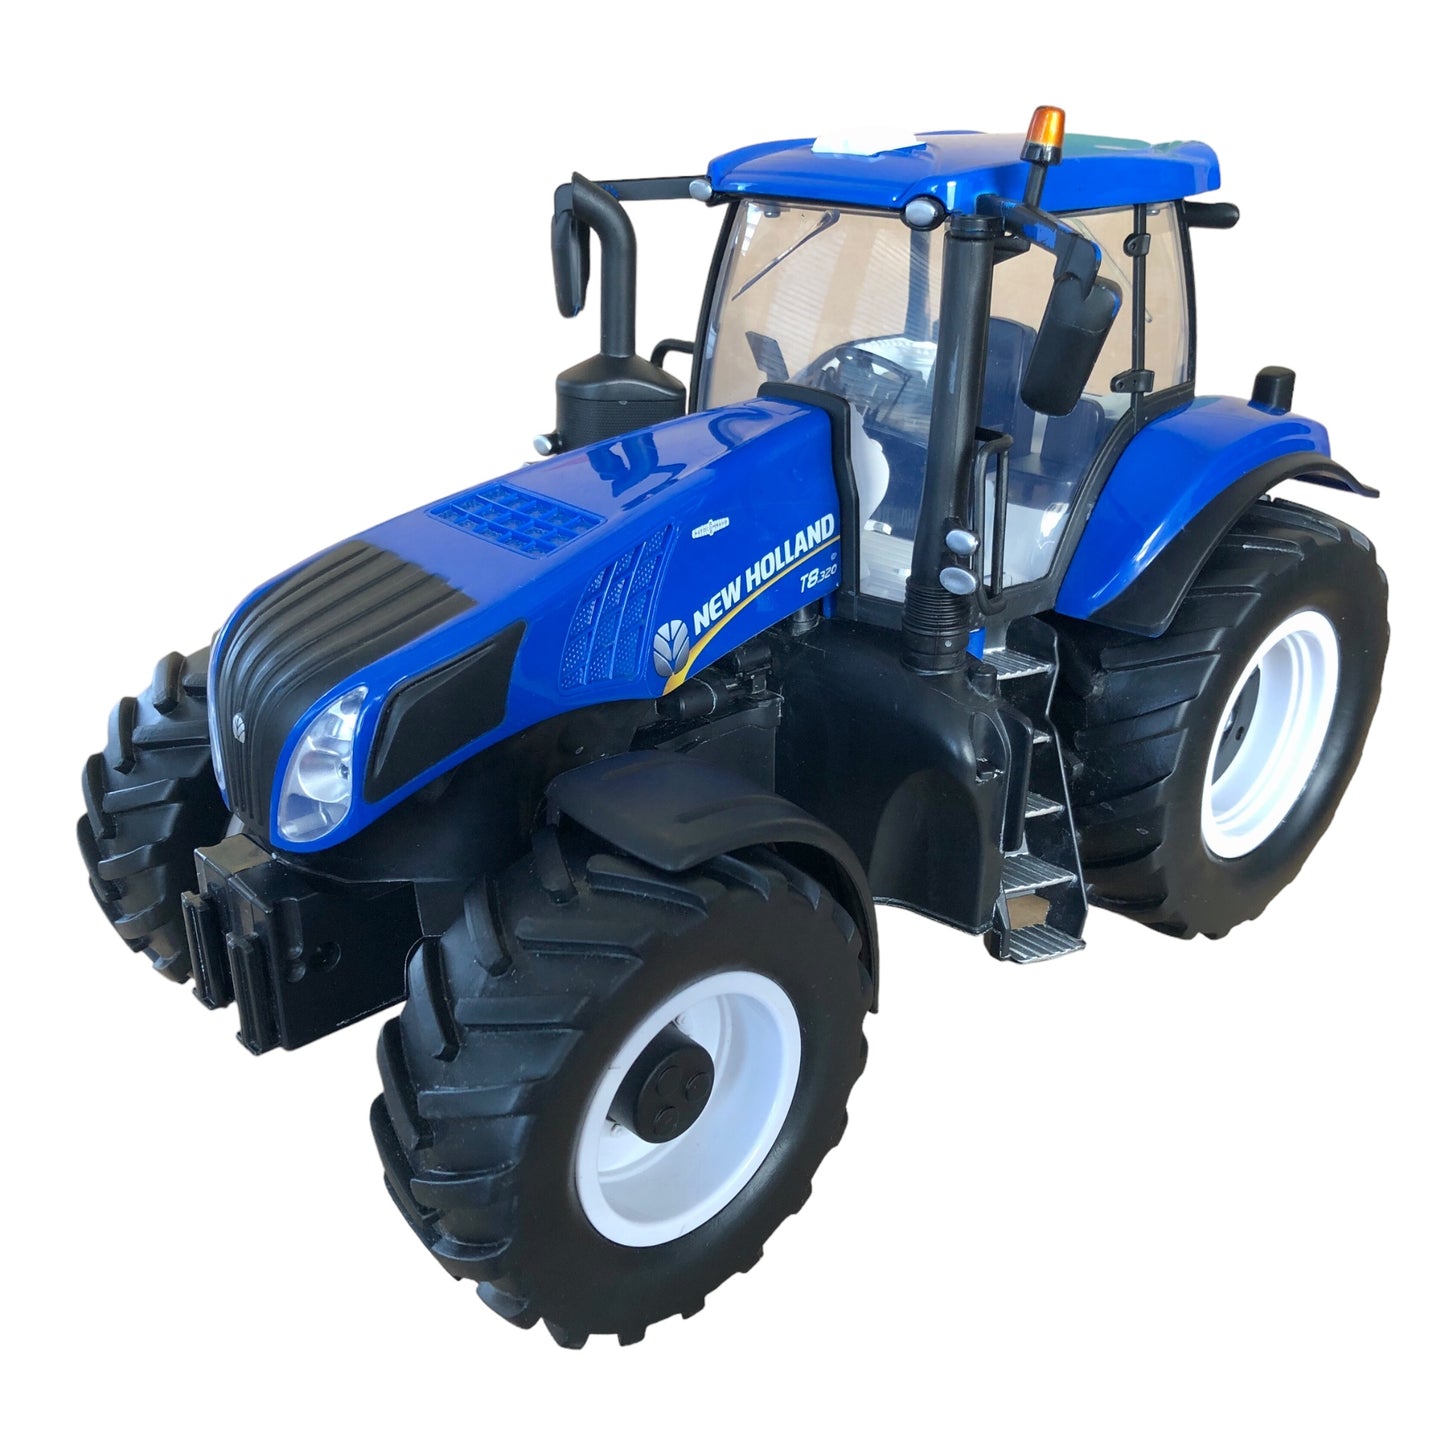 Maisto - New Holland RC remote-controlled tractor